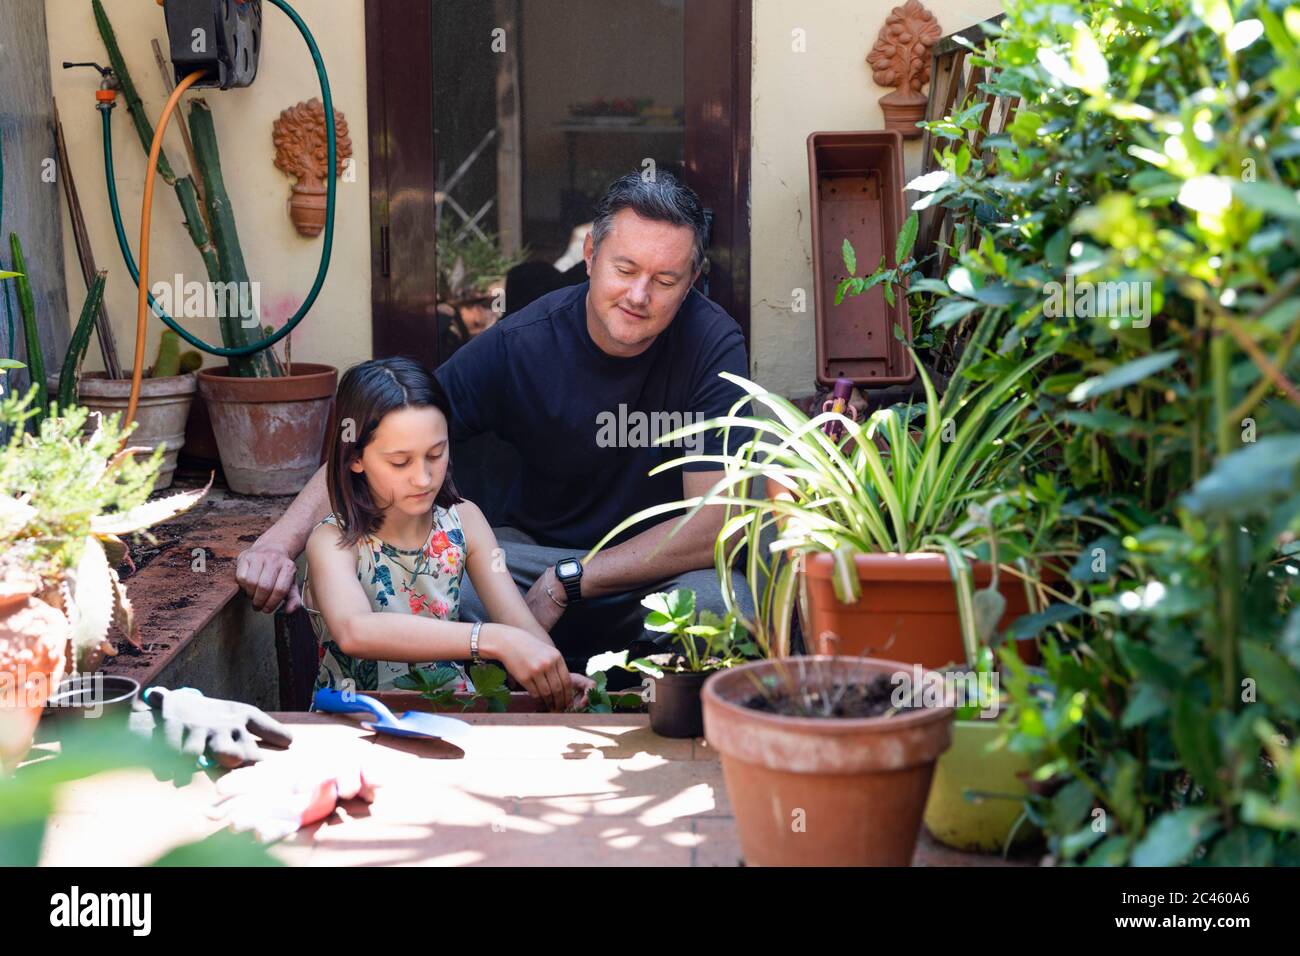 Family gardening during Coronavirus lockdown, father and daughter potting up plants in a small garden. Stock Photo